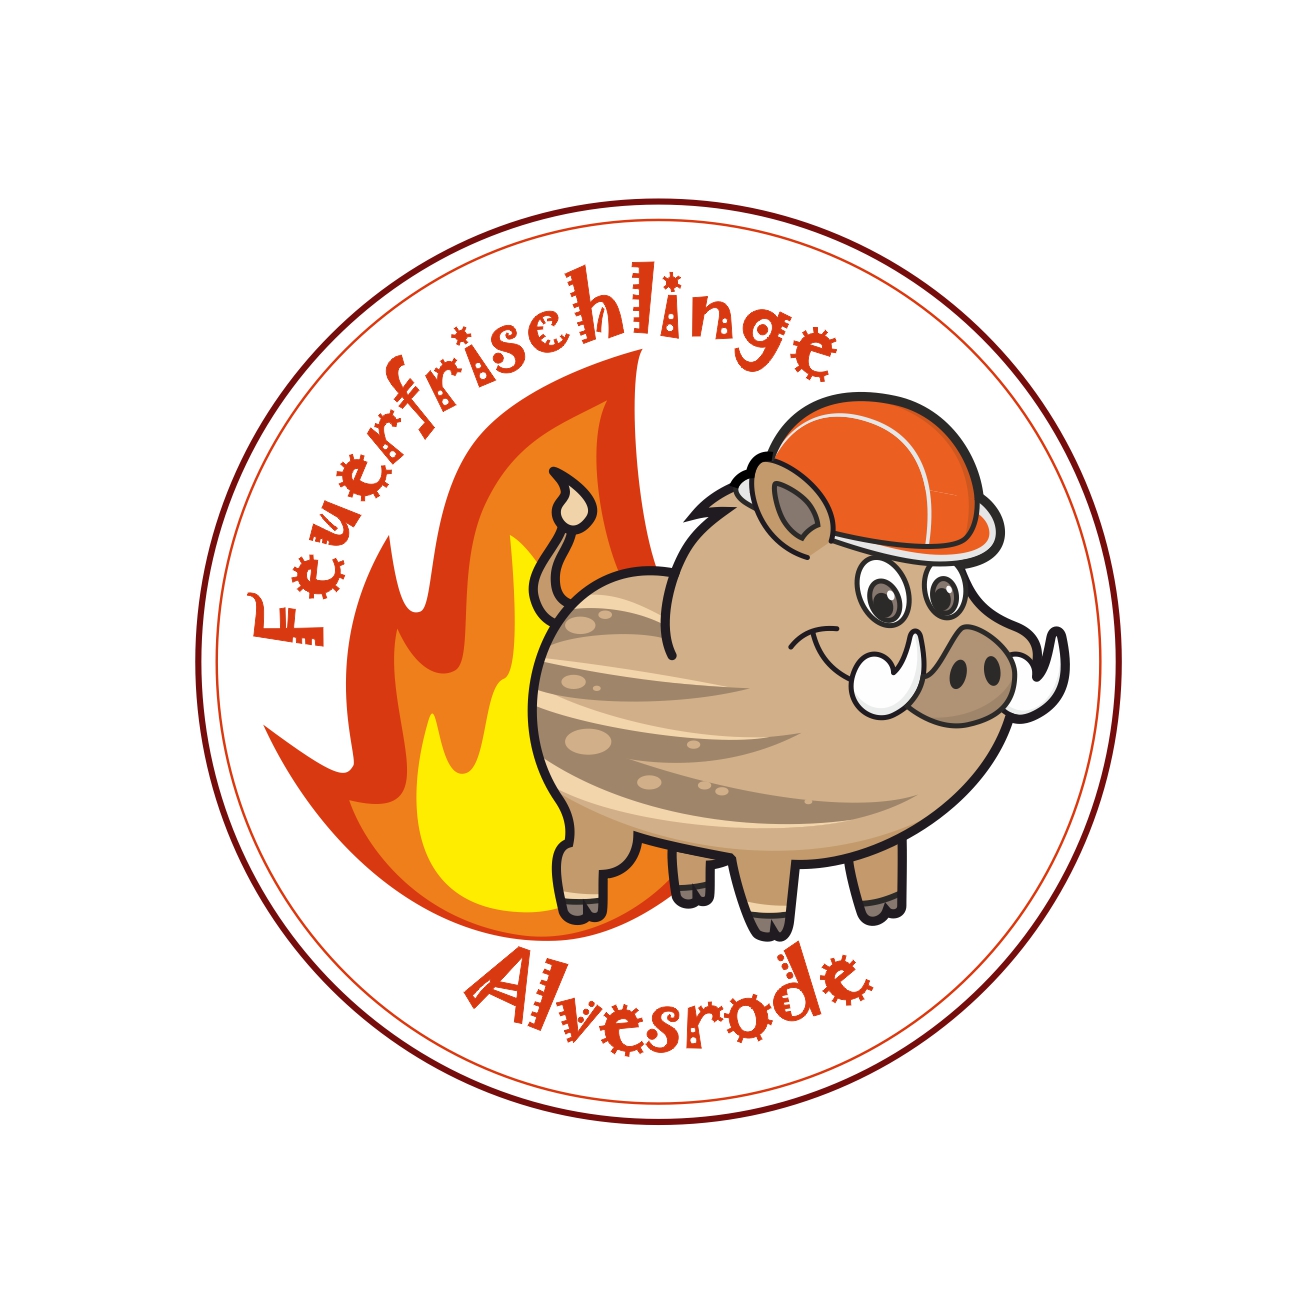 You are currently viewing Feuerfrischlinge Alvesrode